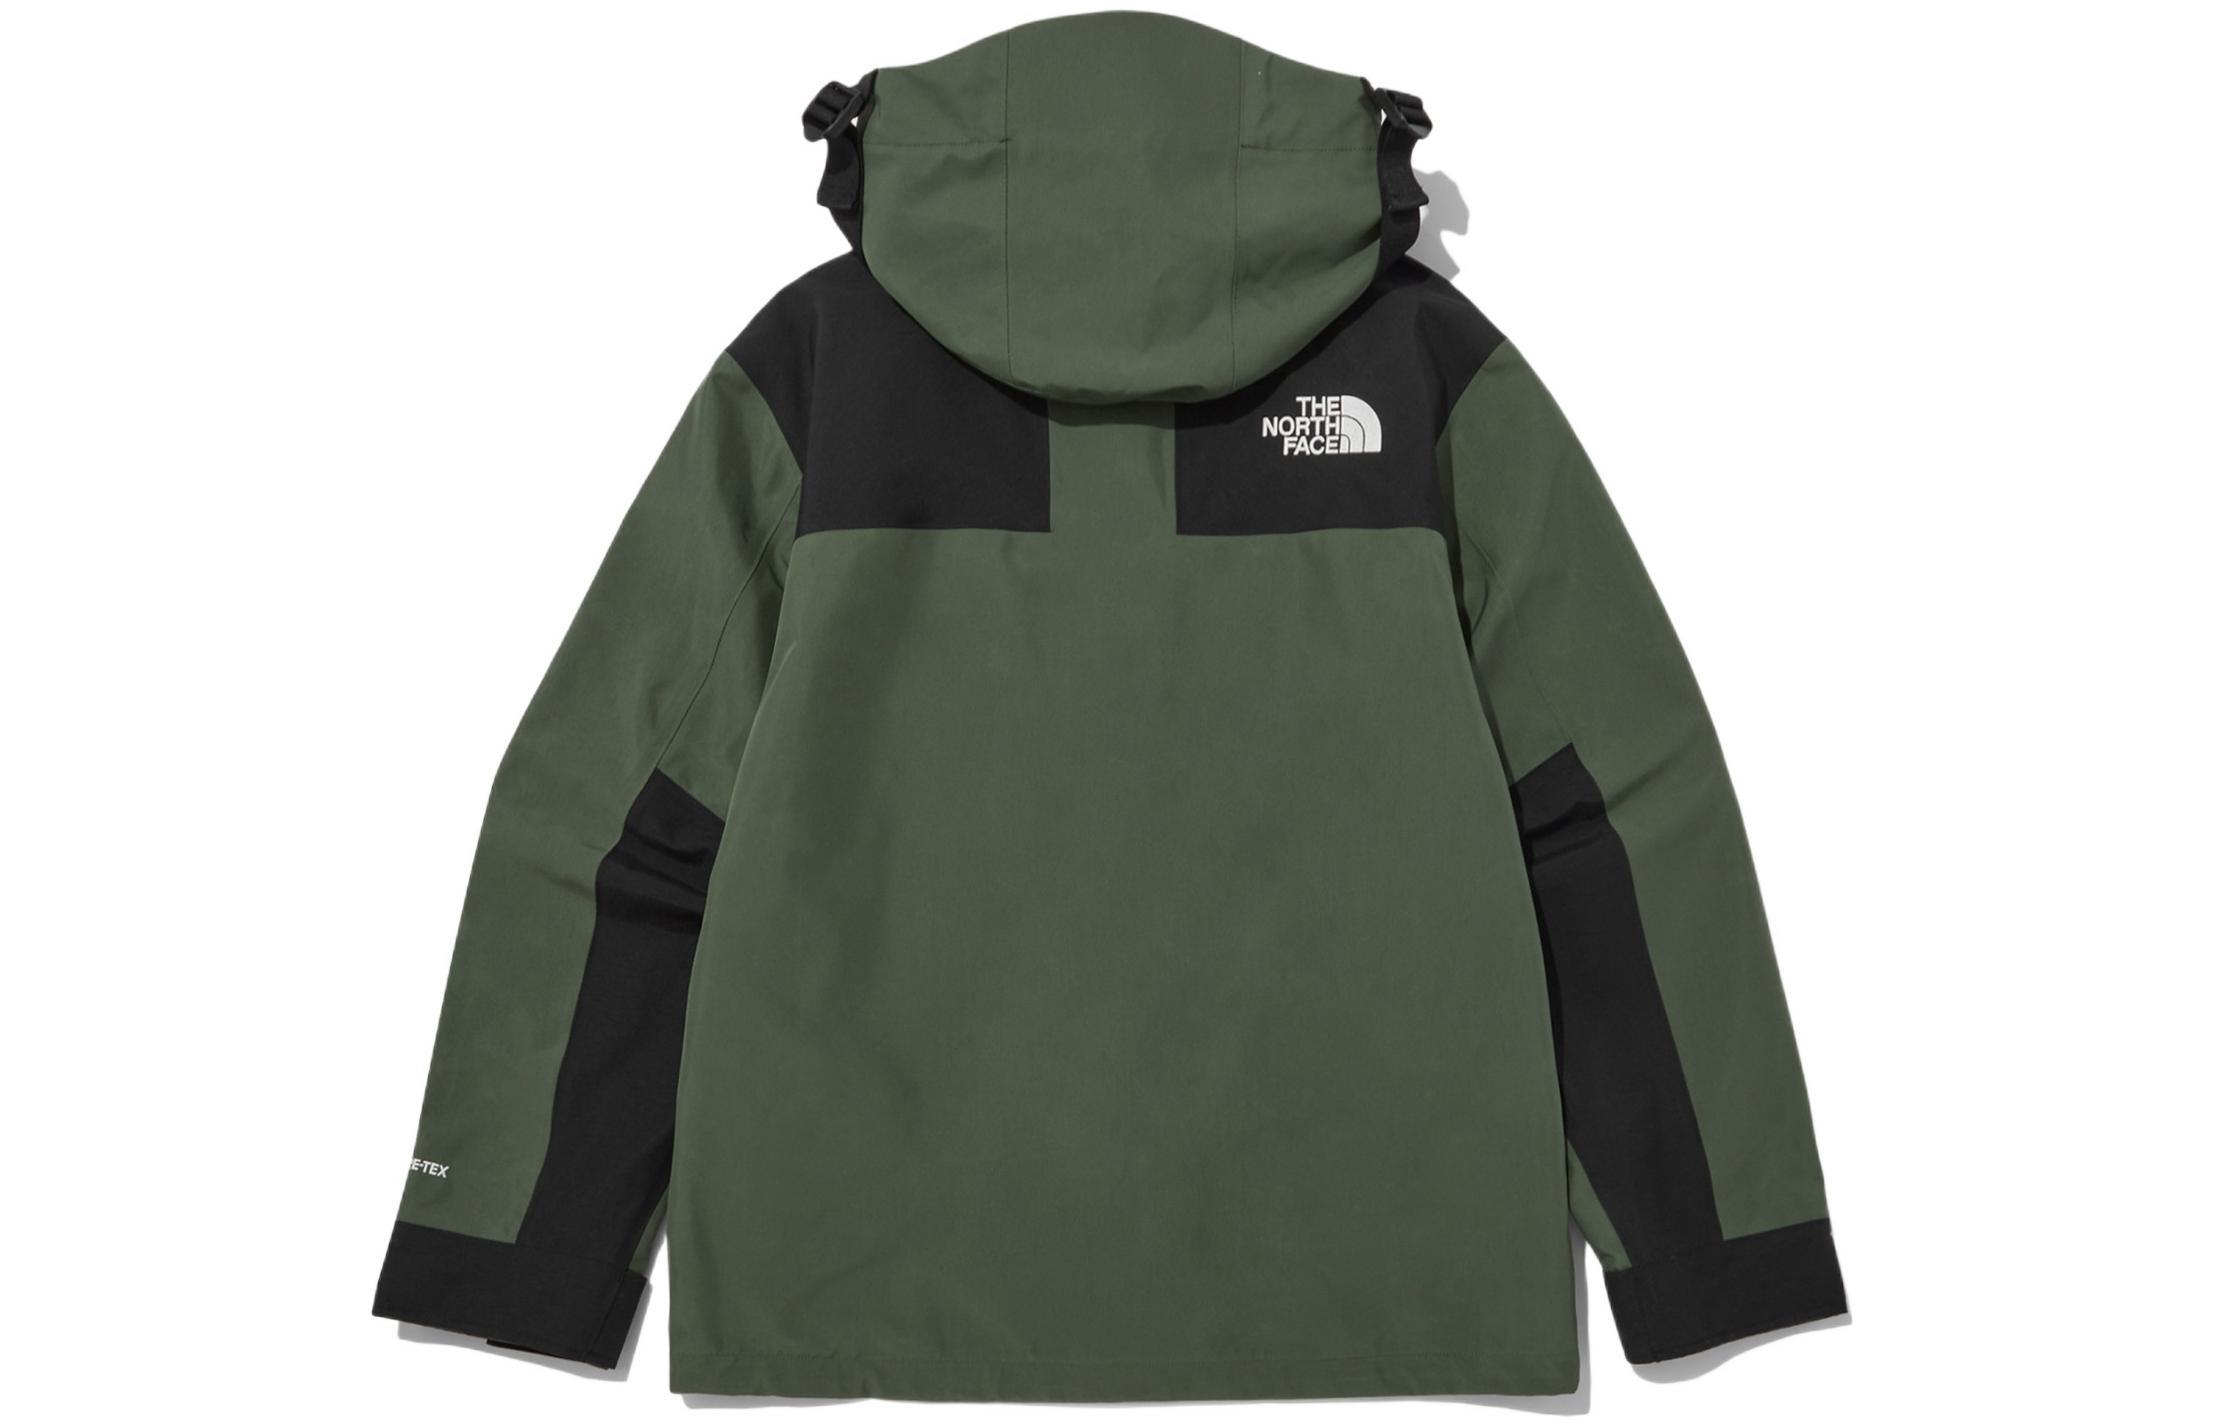 THE NORTH FACE FW22 Novelty Gore-tex MountainJacket 1990